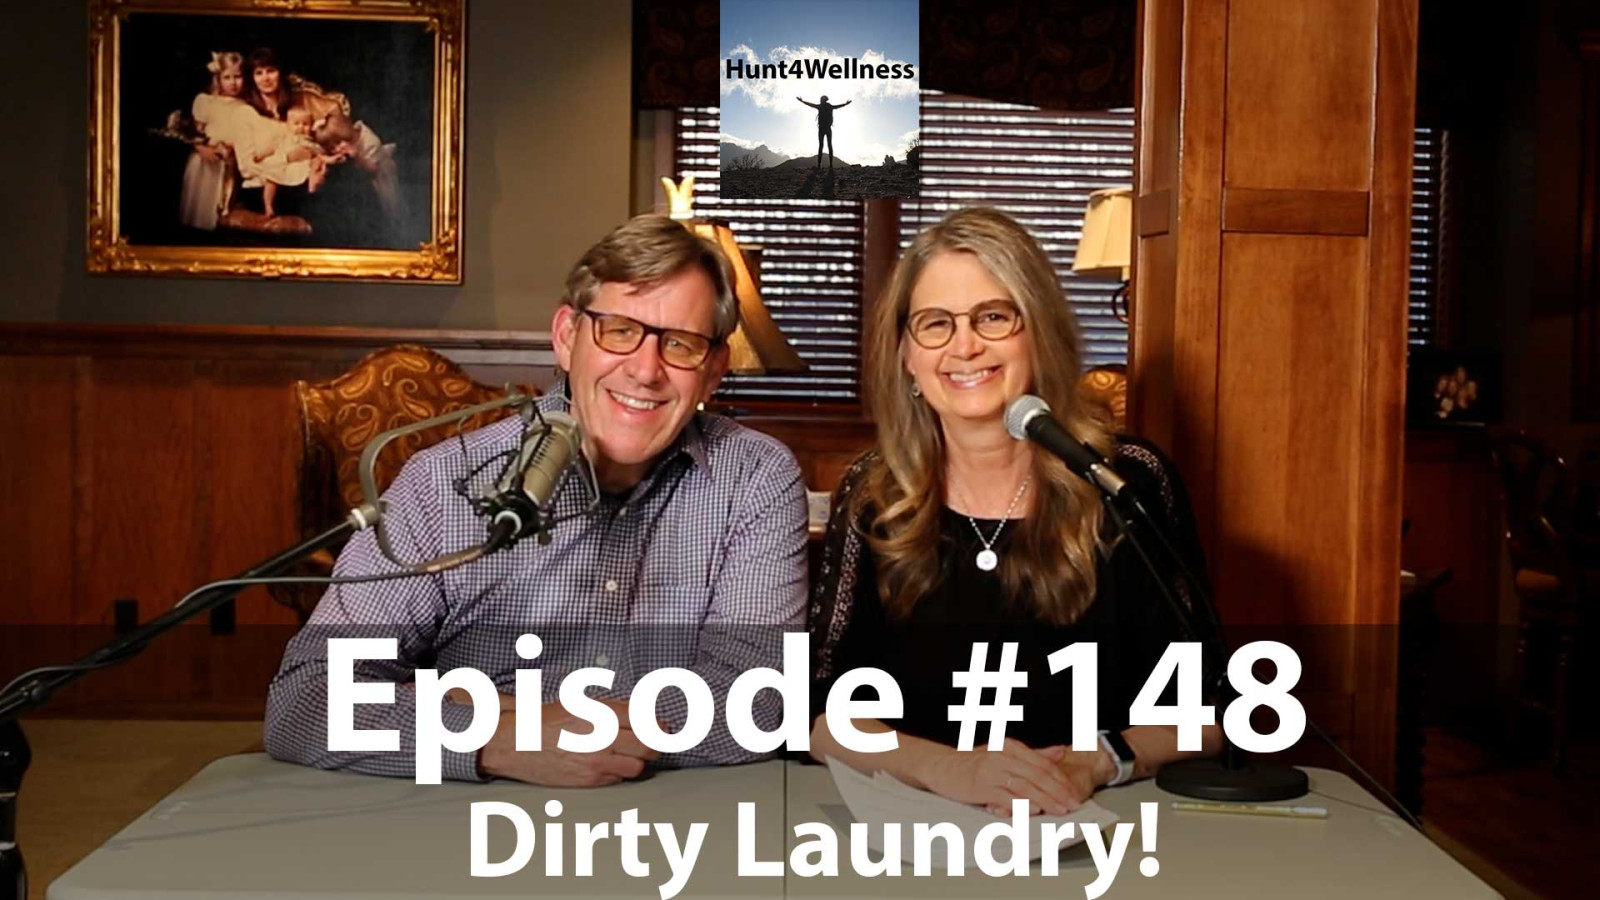 Episode #148 - Dirty Laundry!